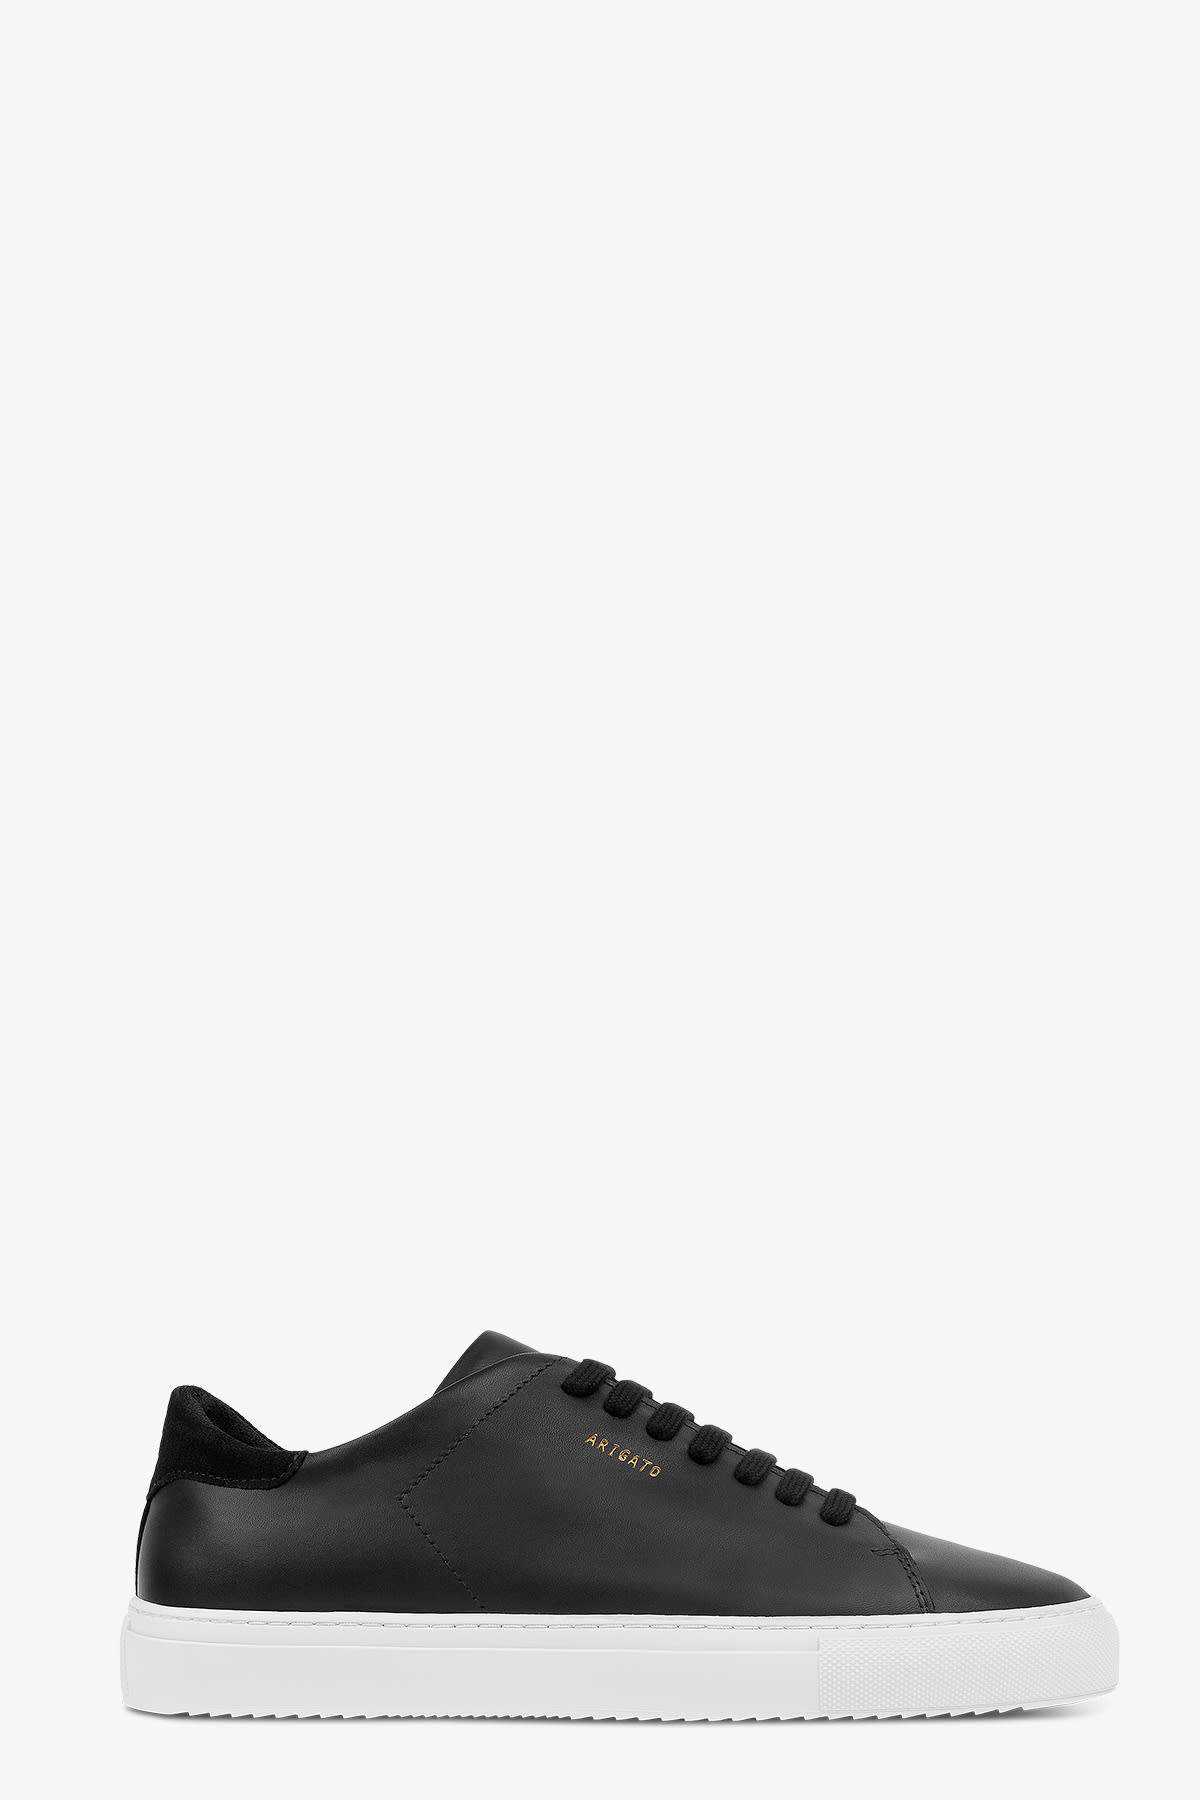 Axel Arigato Clean 90 Black leather low top lace-up sneaker - Clean 90